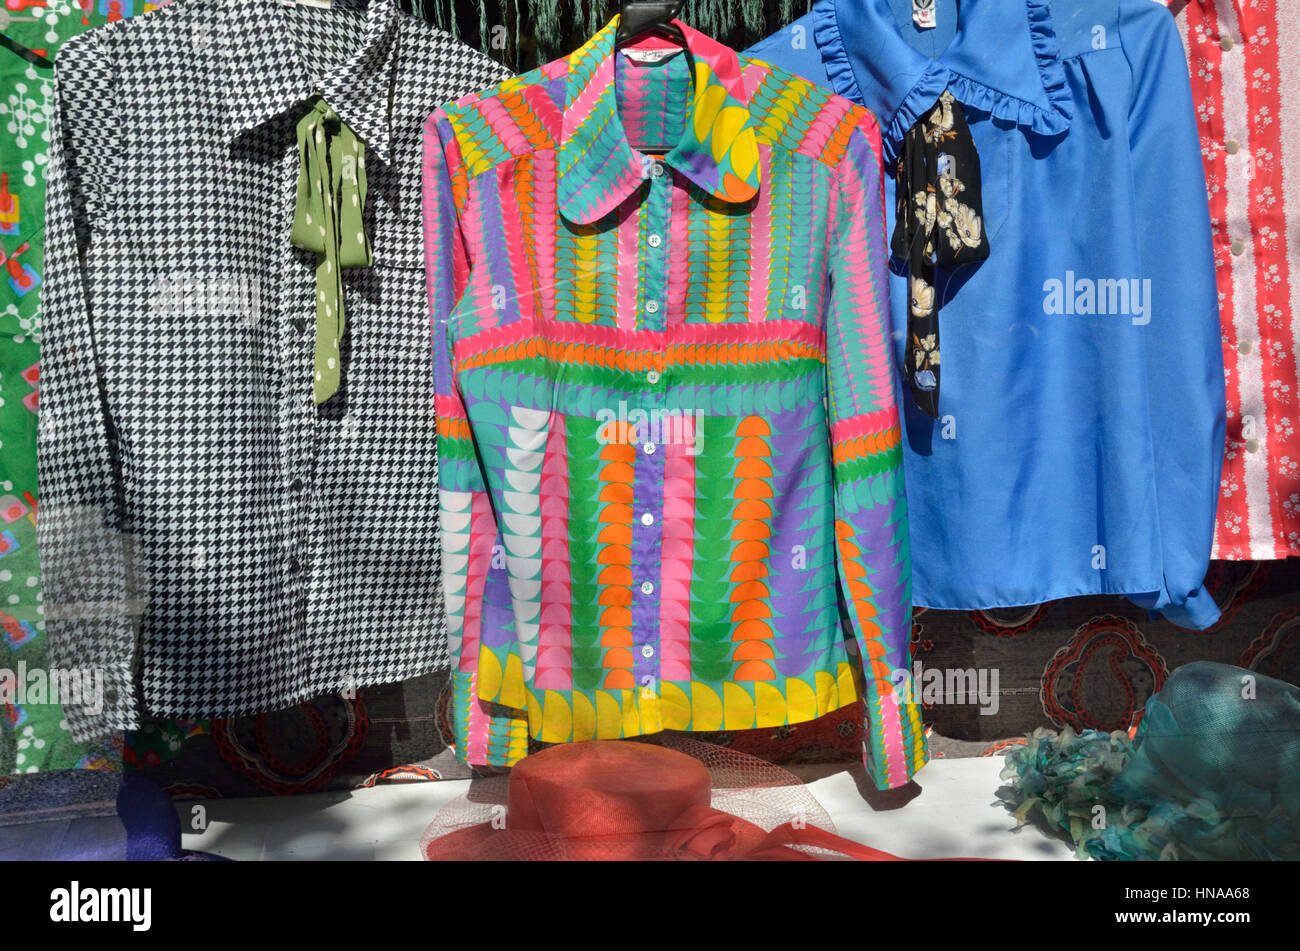 Multicoloured,  woman’s blouse in a shop window display Stock Photo